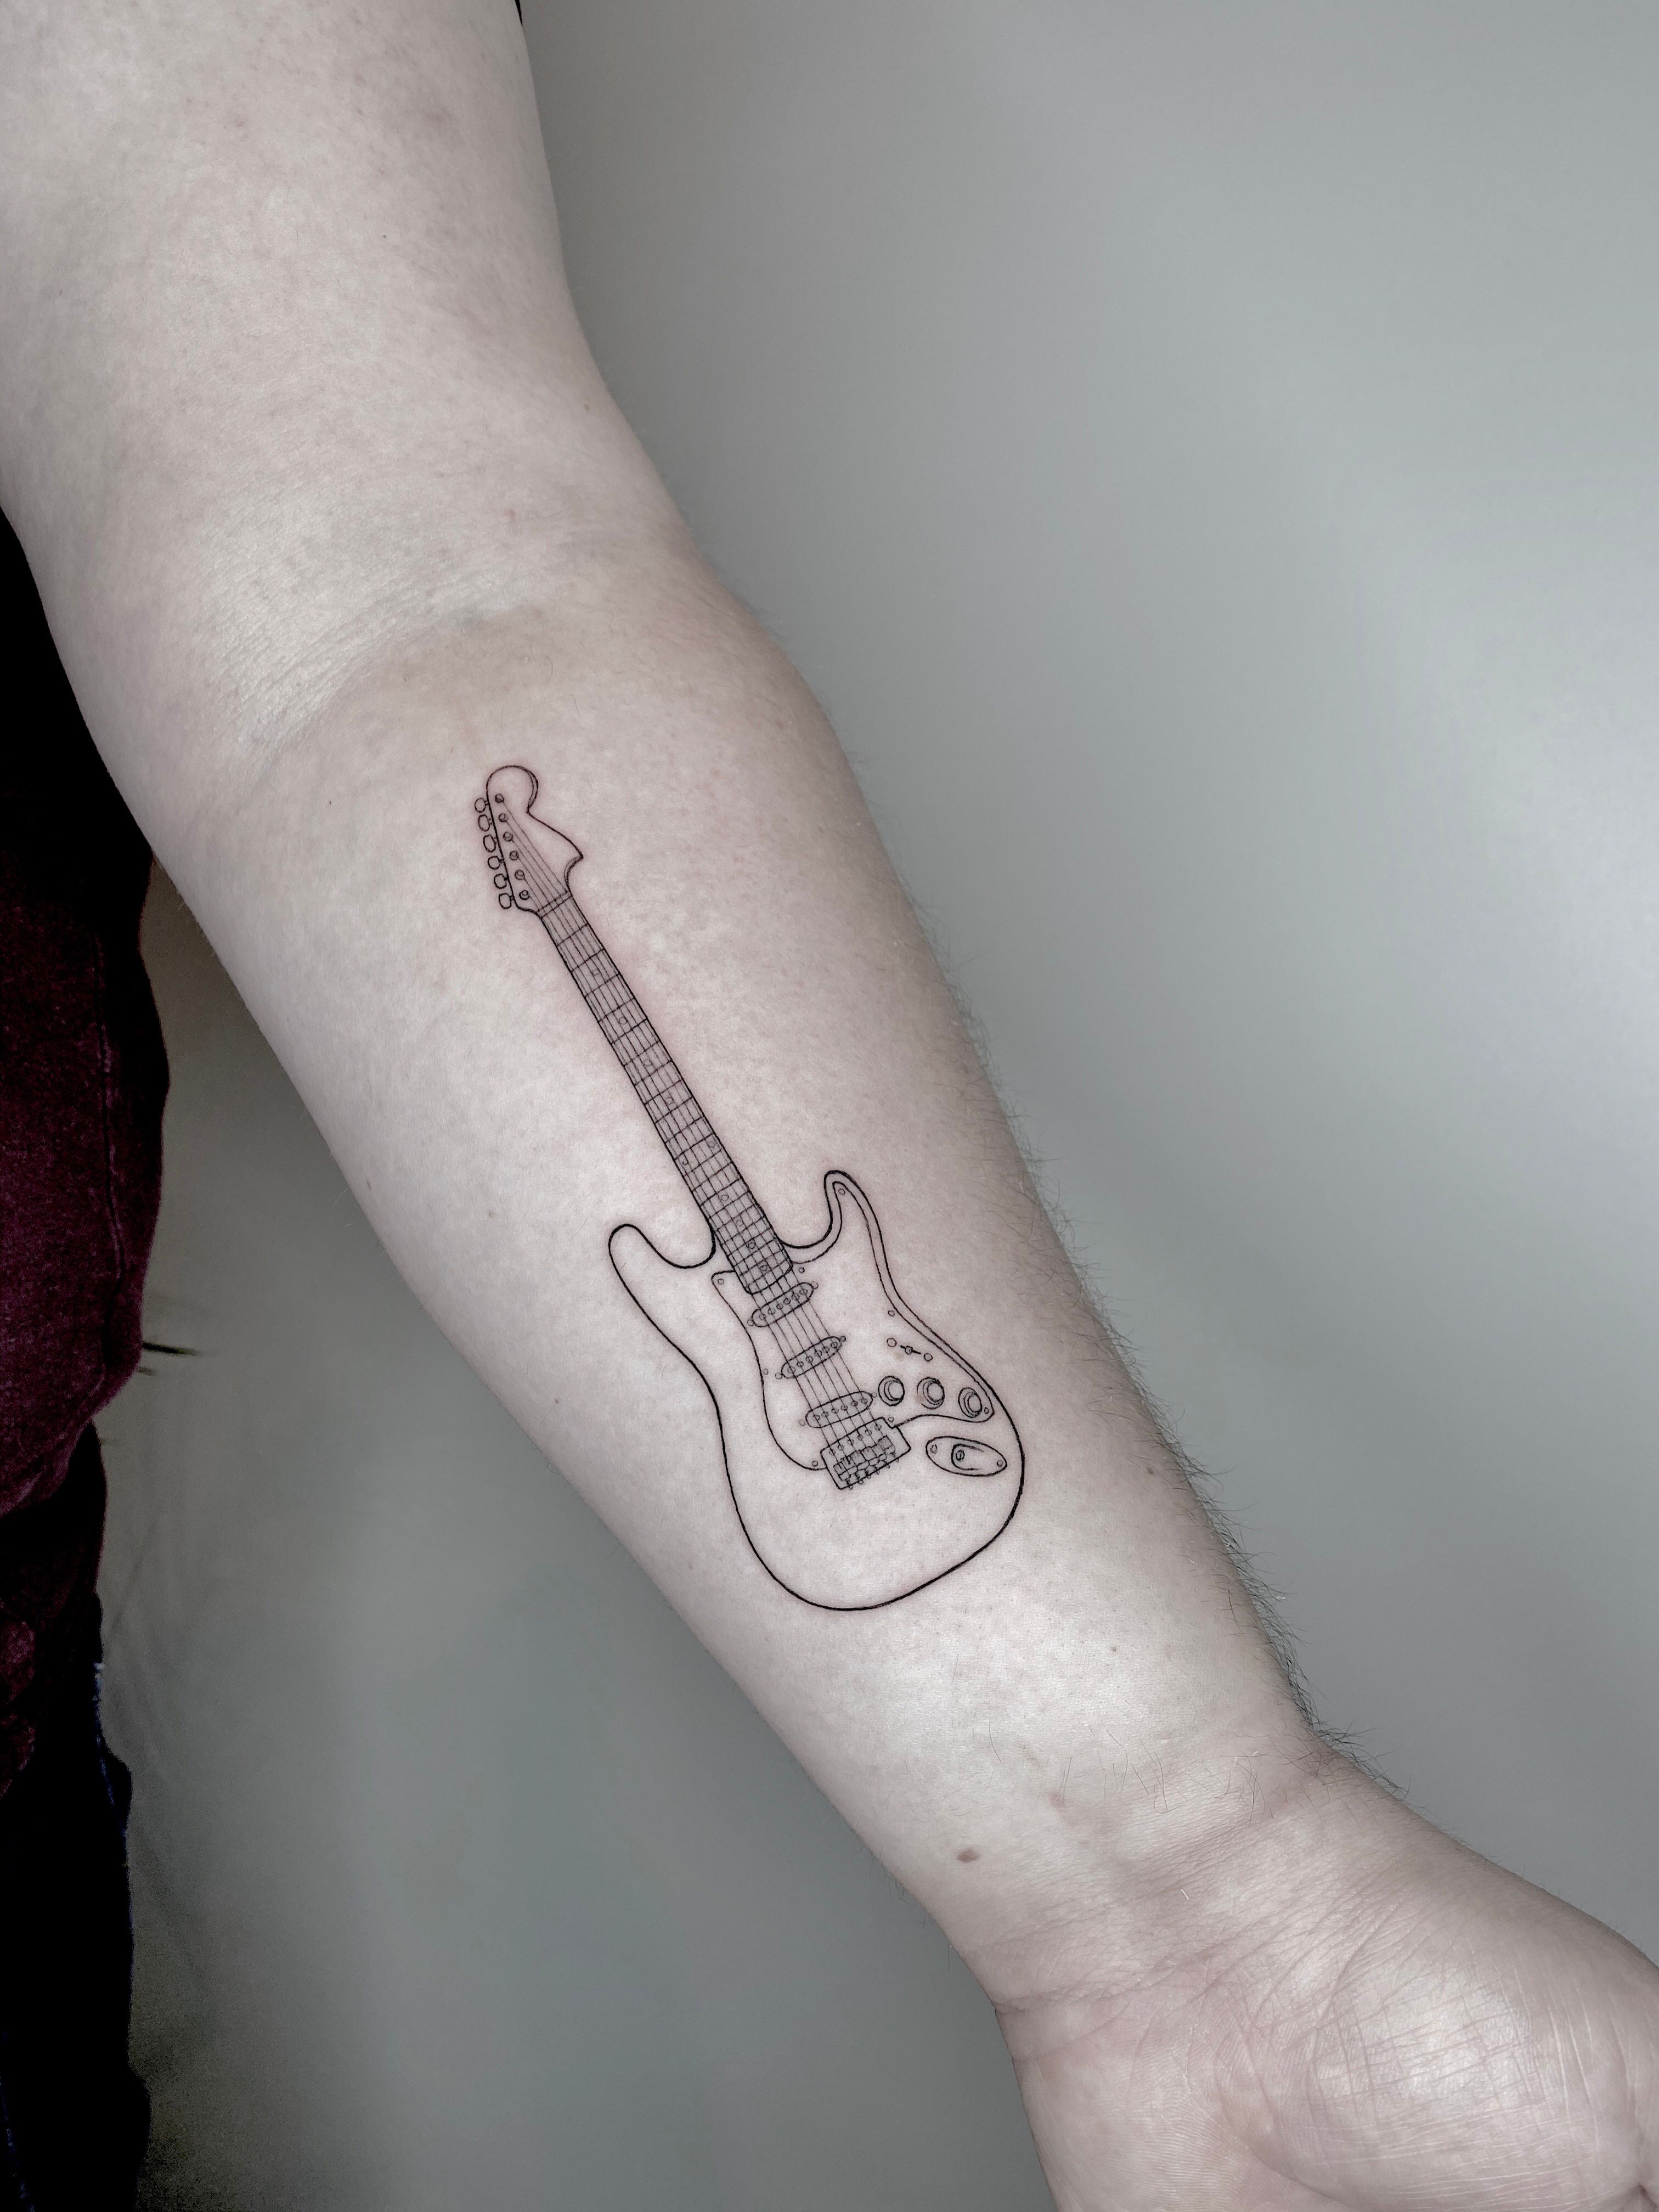 A very small tattoo of a black and grey guitar on forearm on Craiyon